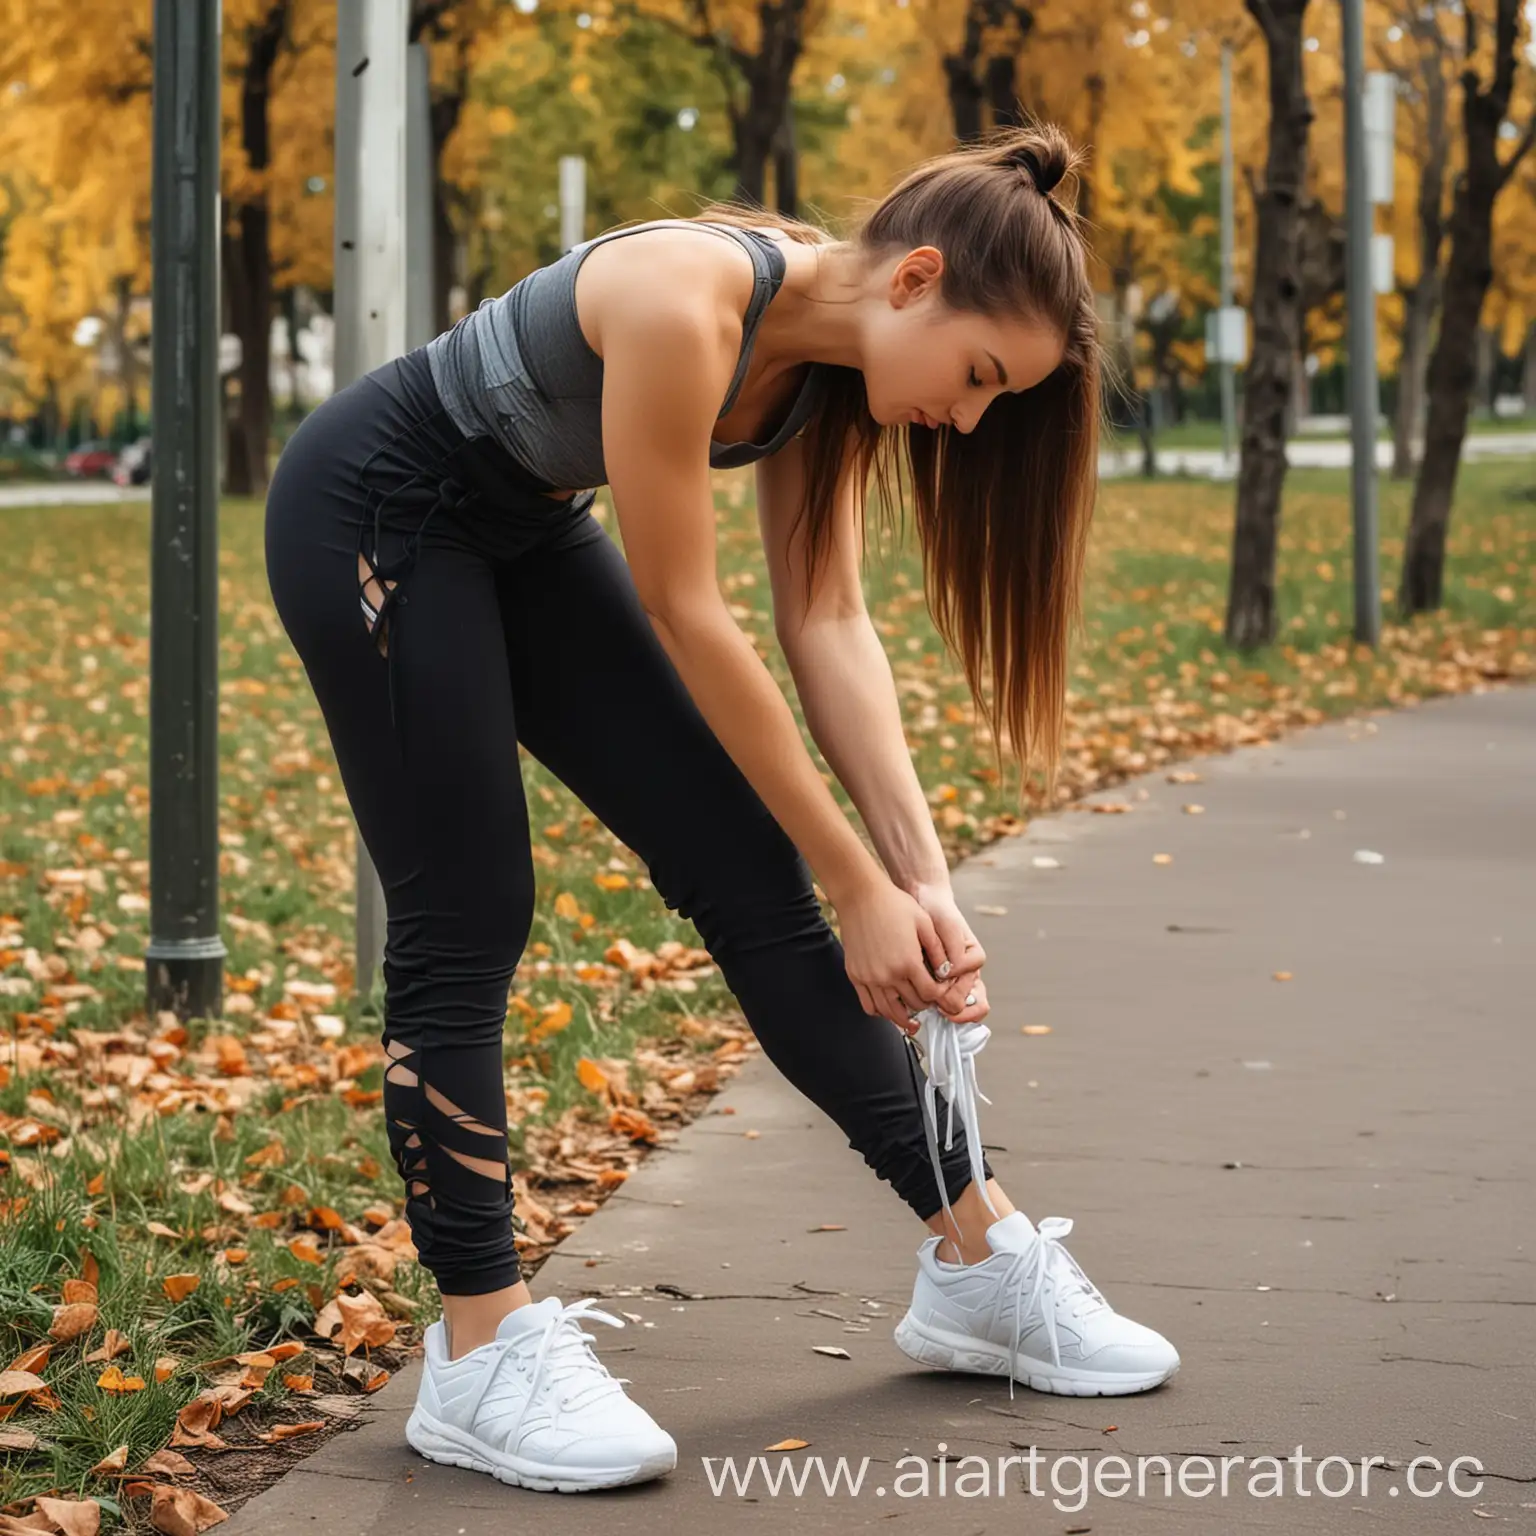 Active-Girl-Tying-Sneakers-in-the-Park